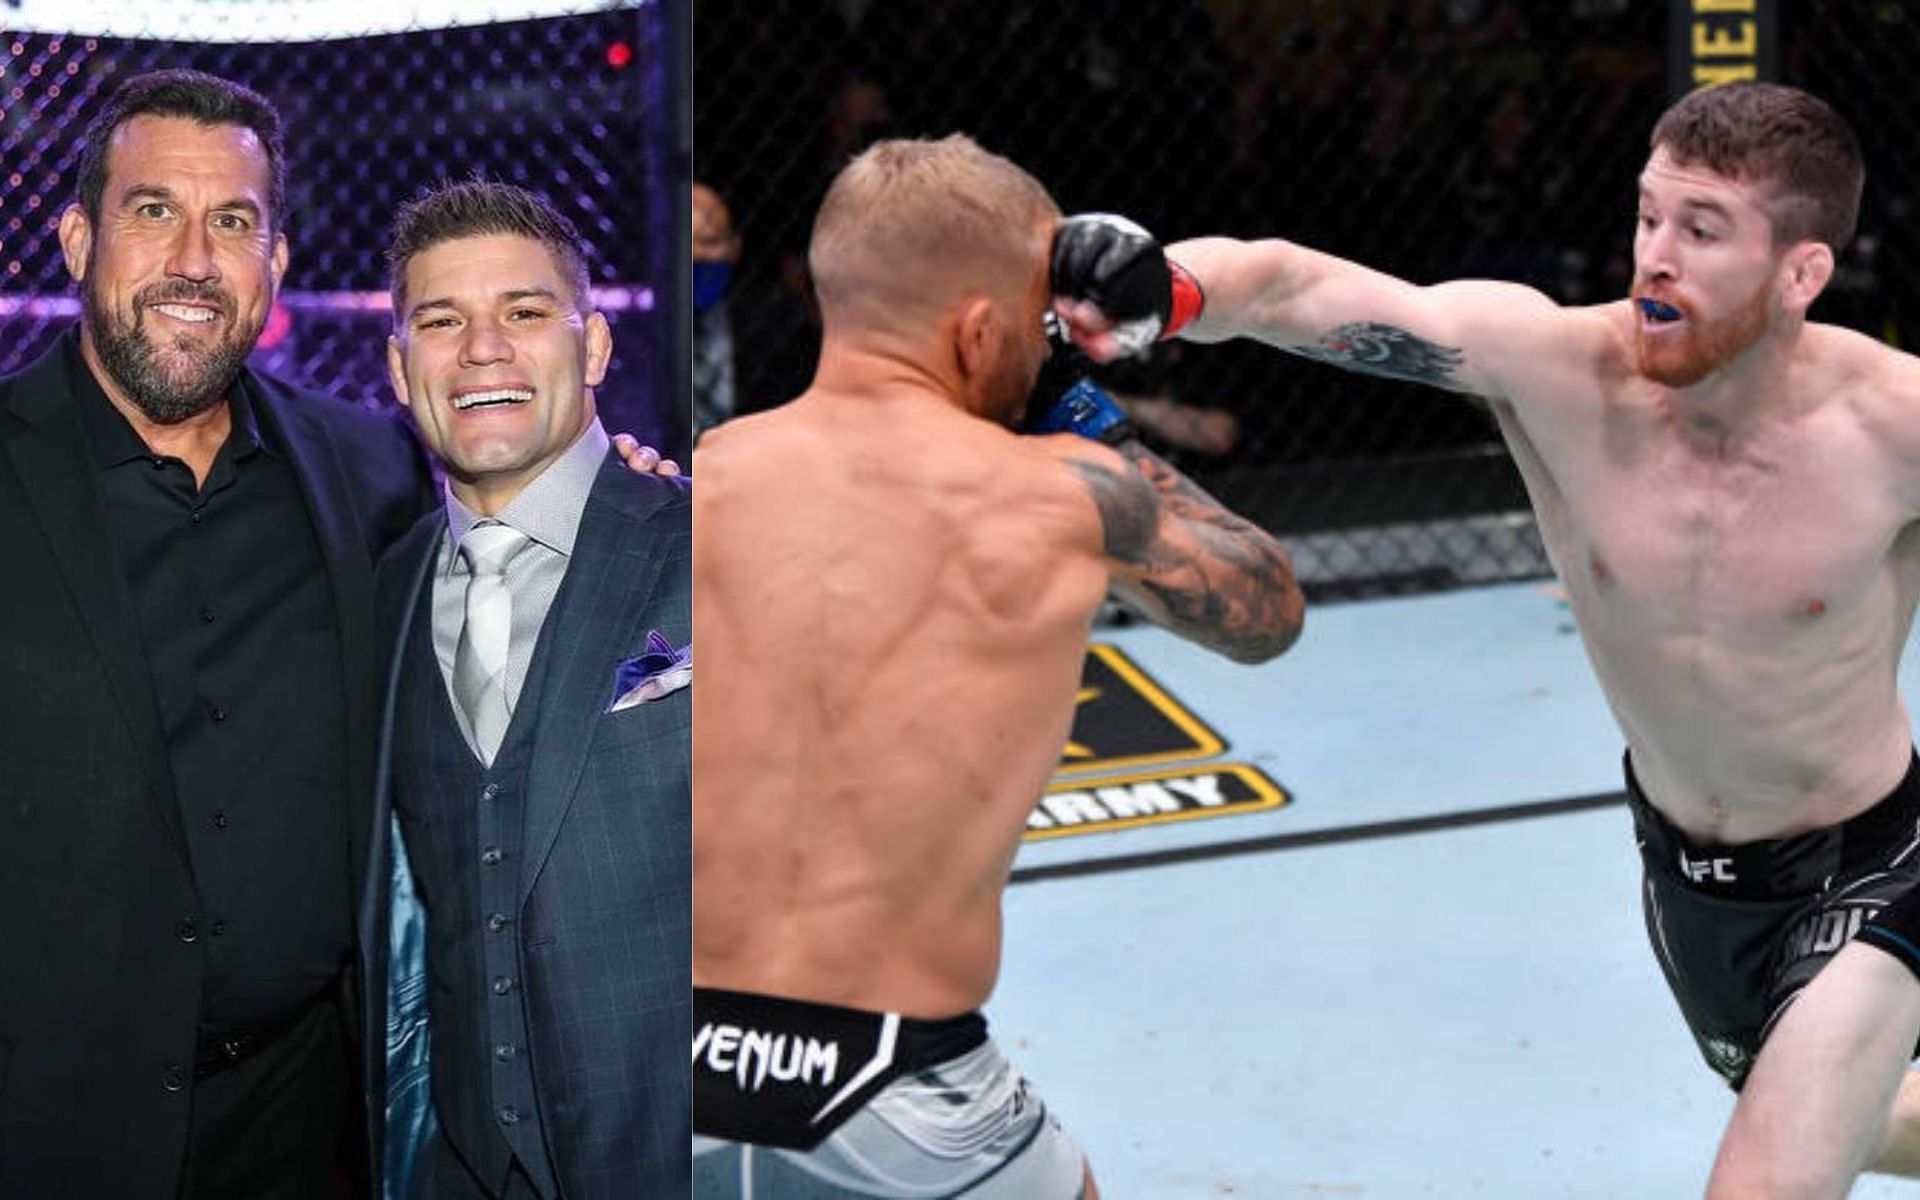 From left to right: John McCarthy and Josh Thomson [image courtesy of @therealpunk/Instagram]; TJ Dillashaw and Cory Sandhagen